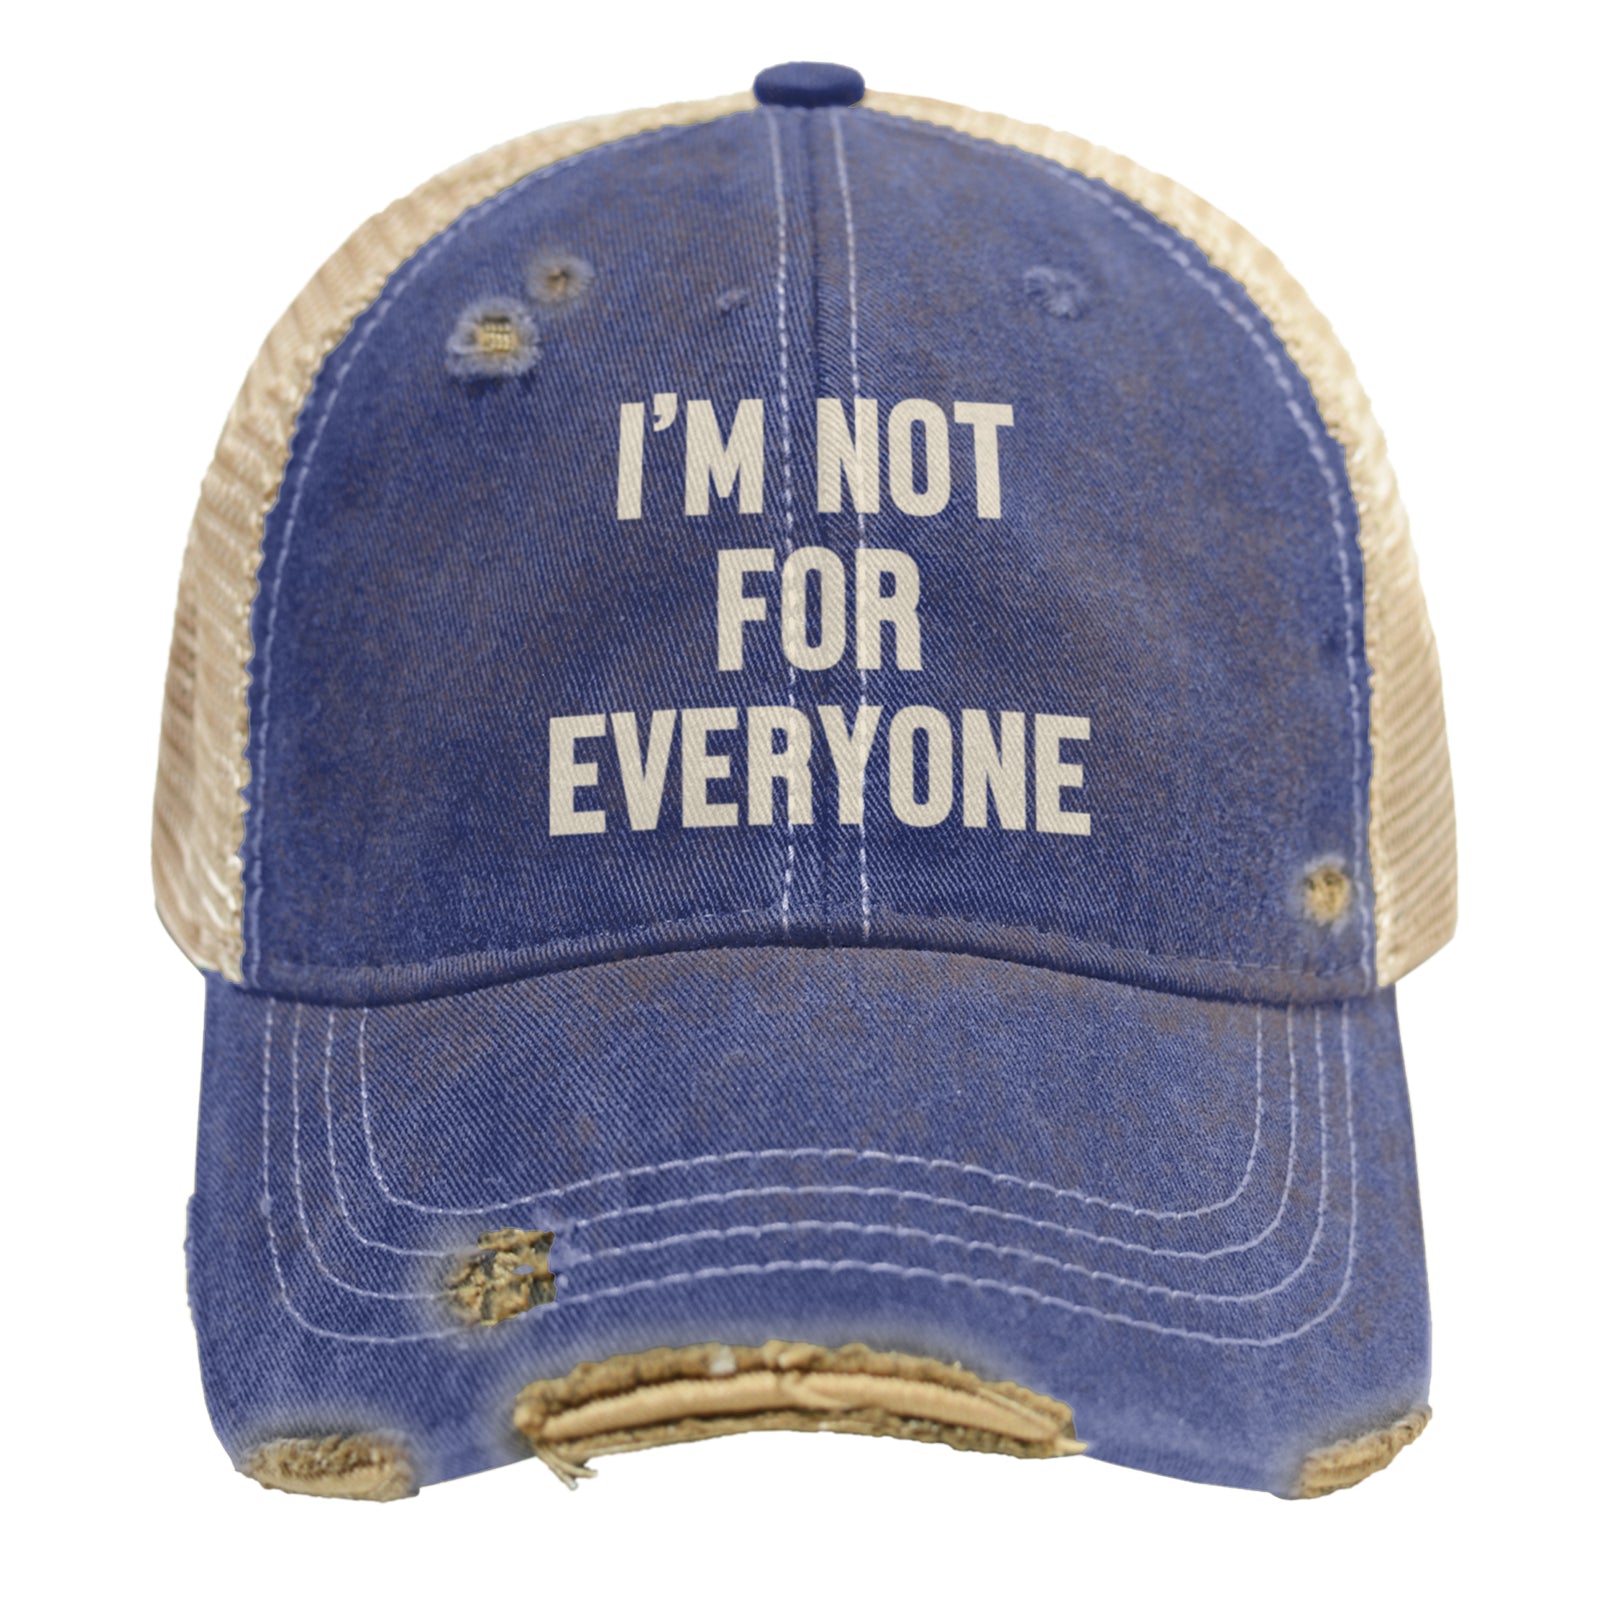 I'm Not For Everyone Snap Back Trucker Cap